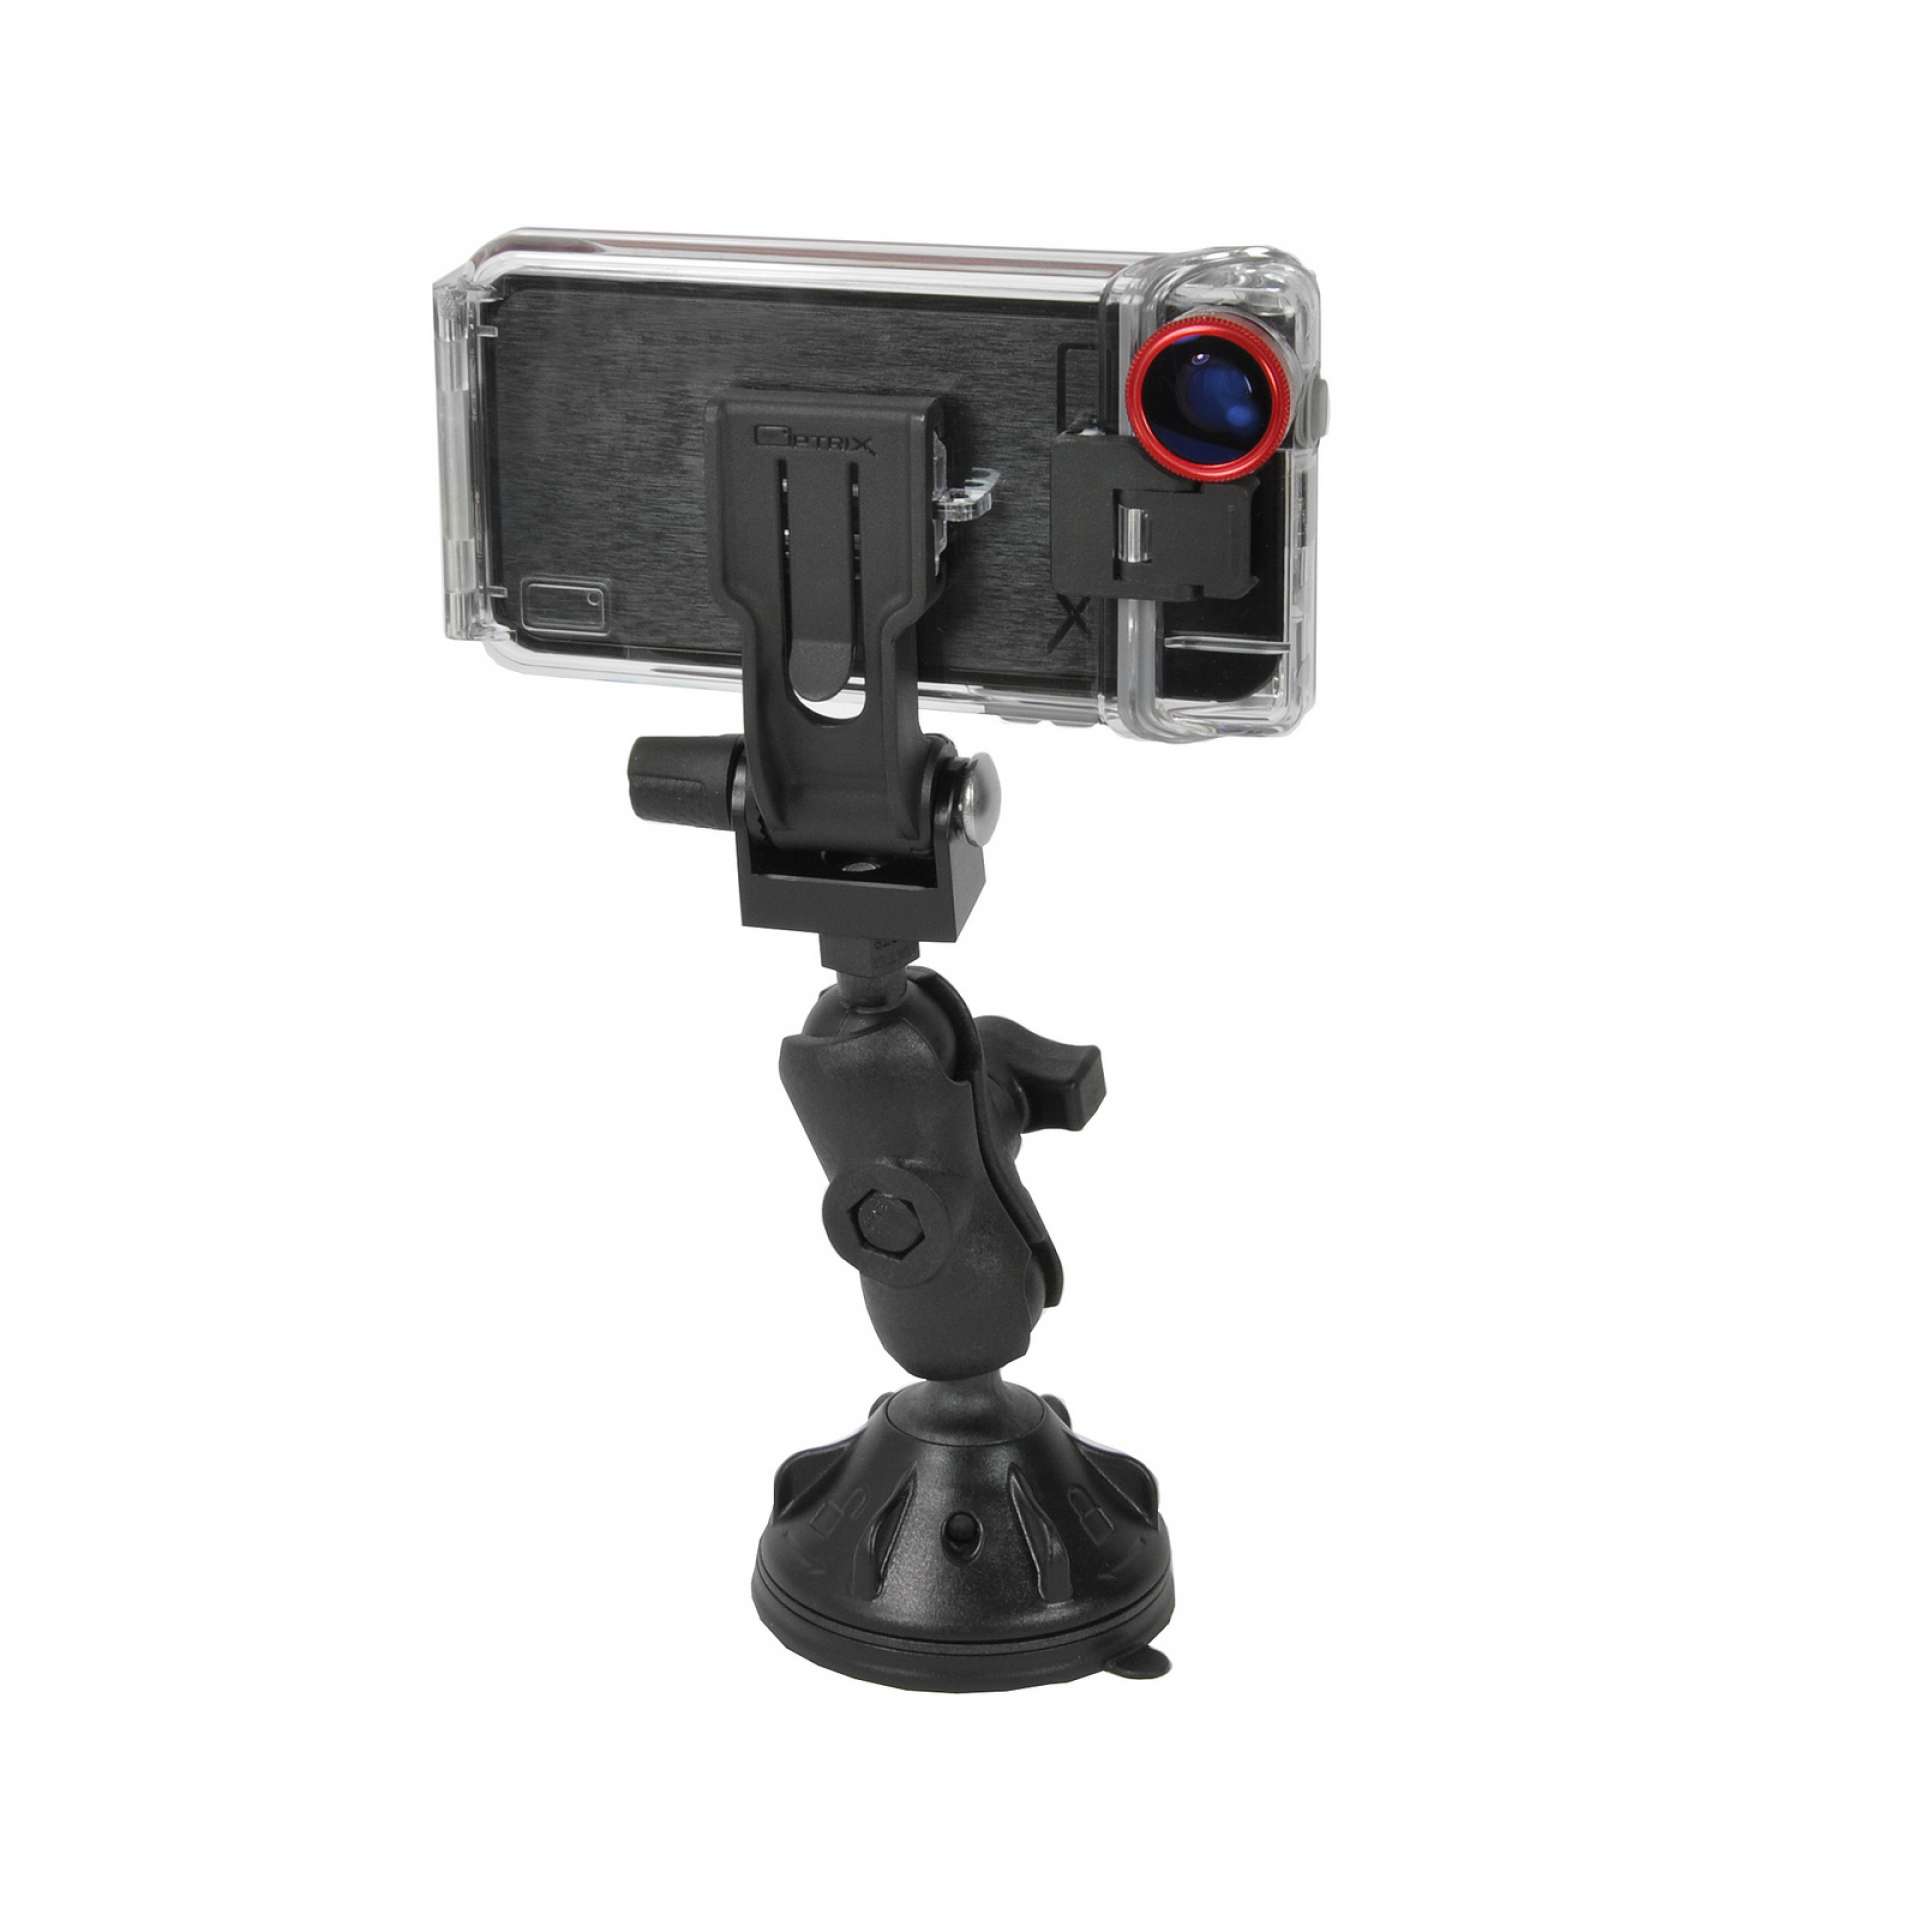 Optrix XD5 Suction Cup Mount